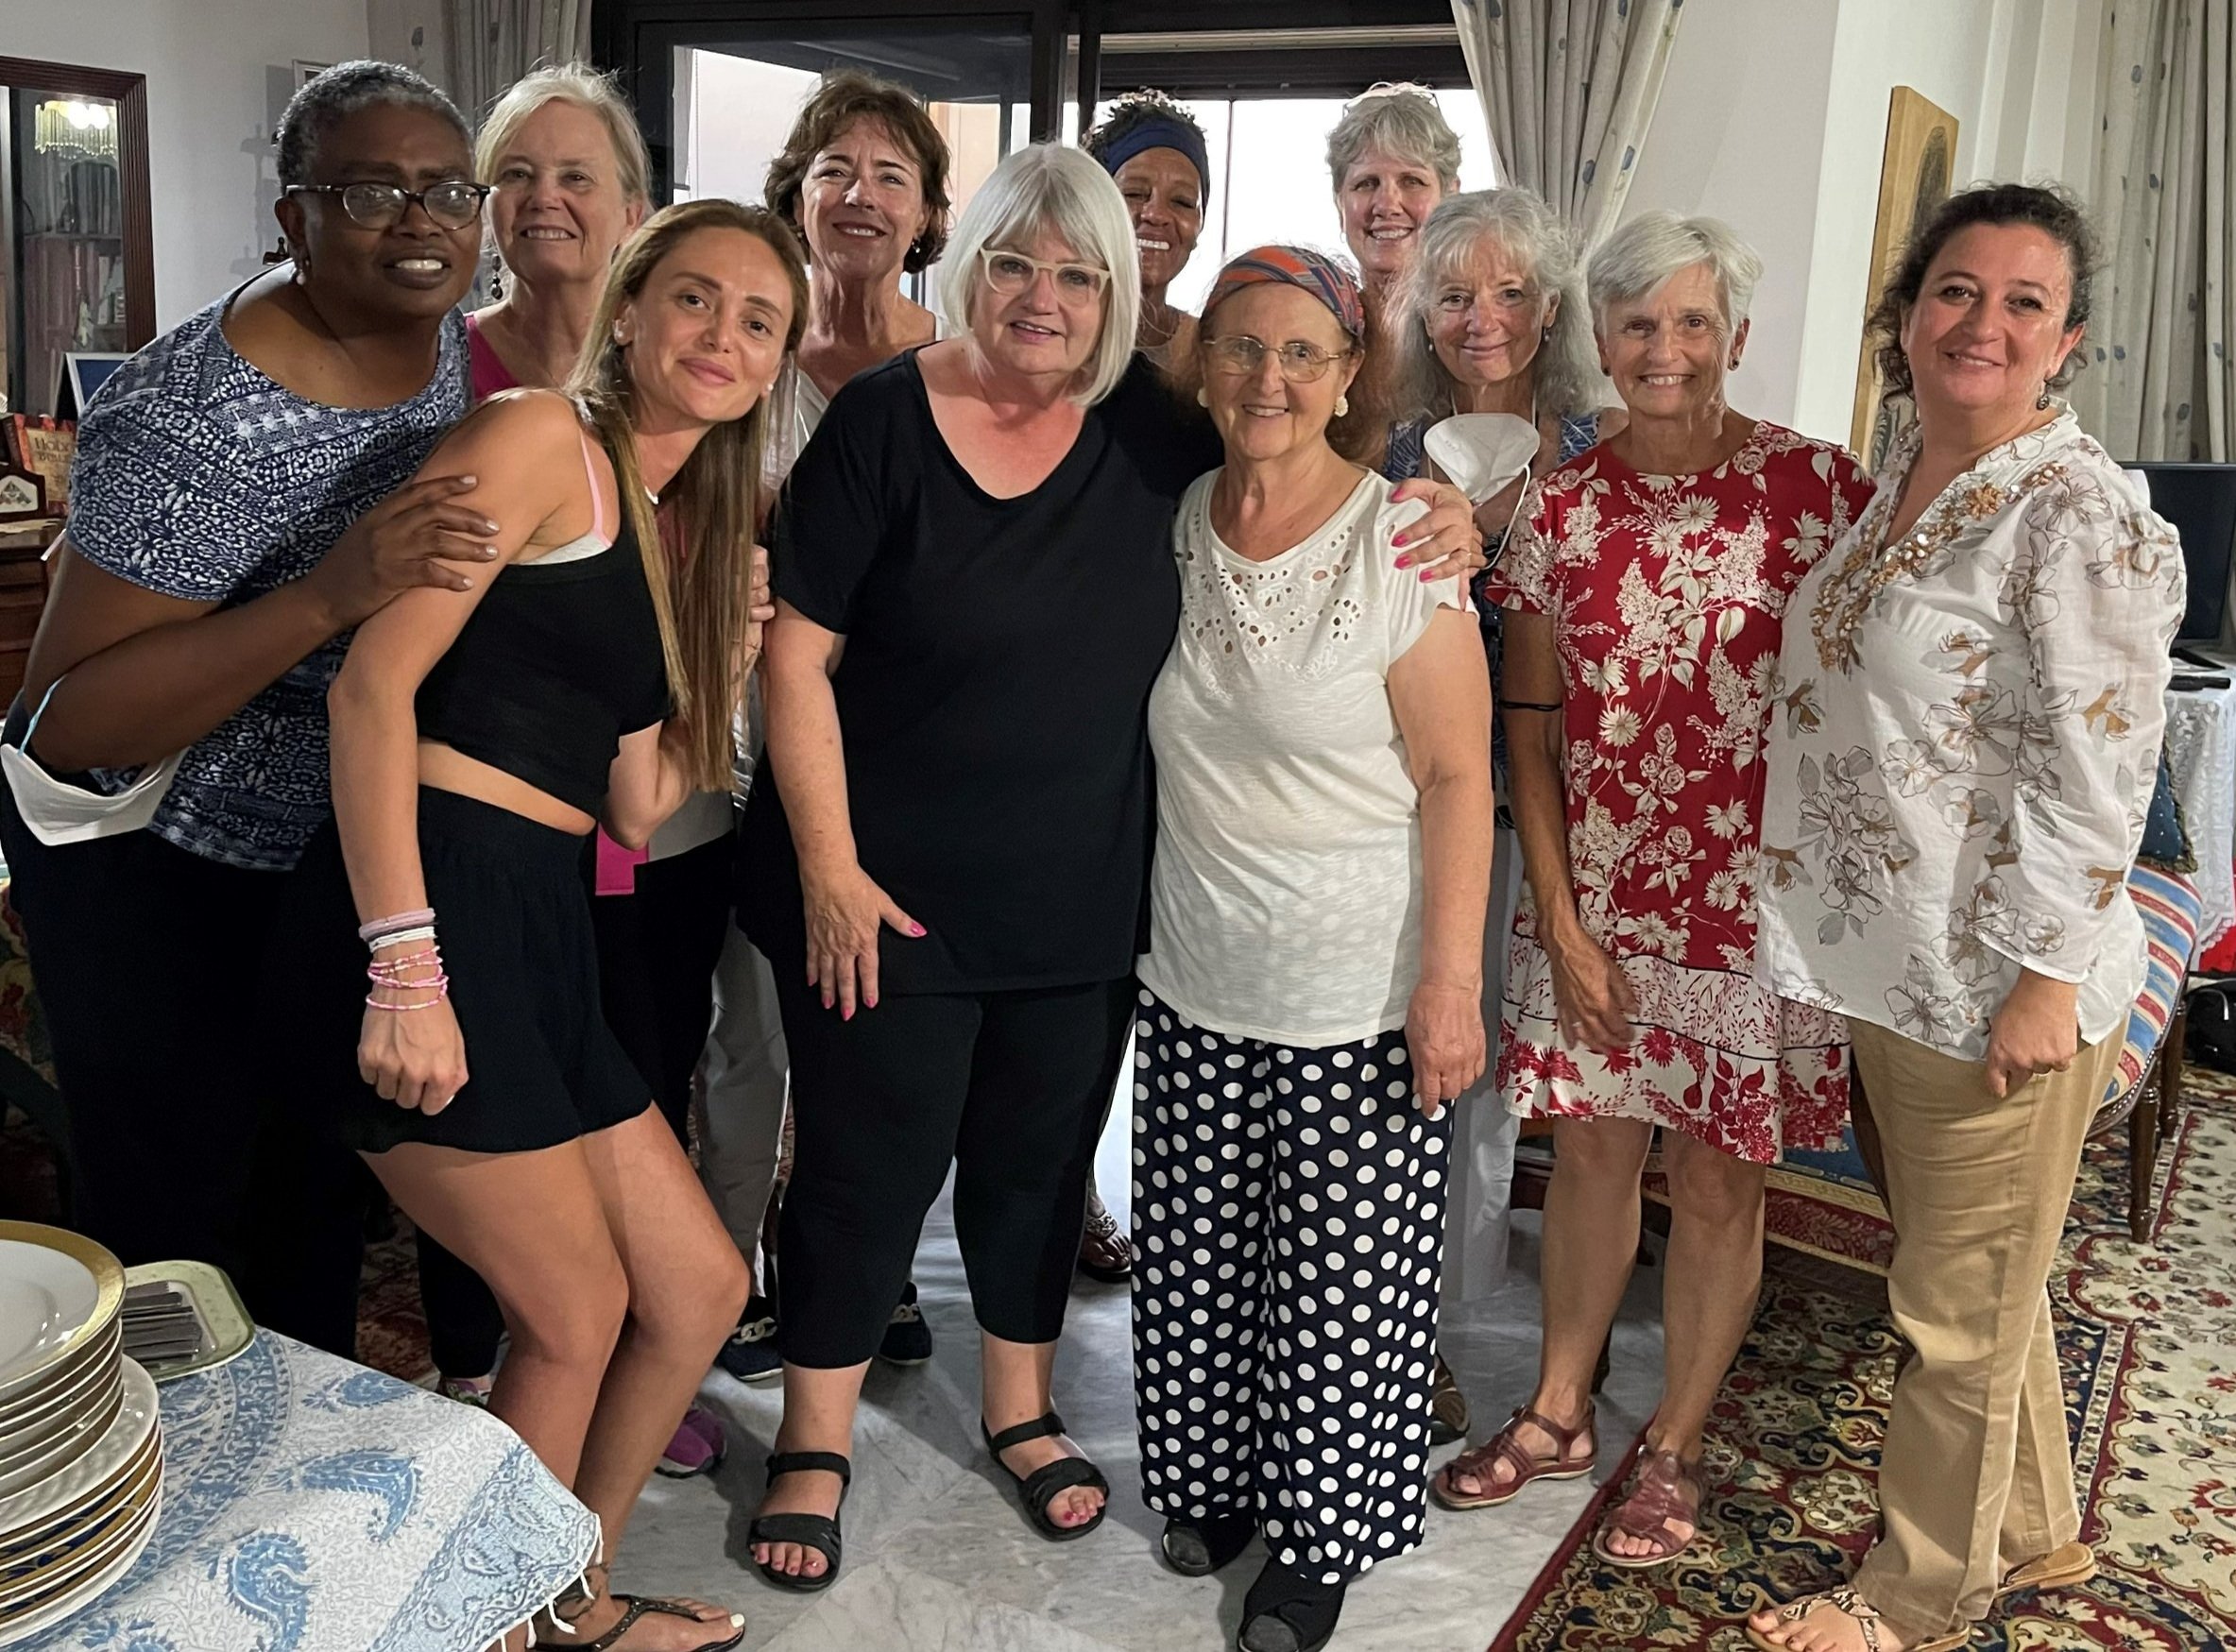   Dr. Mary Mikhael (center front) welcomed our team into her home  